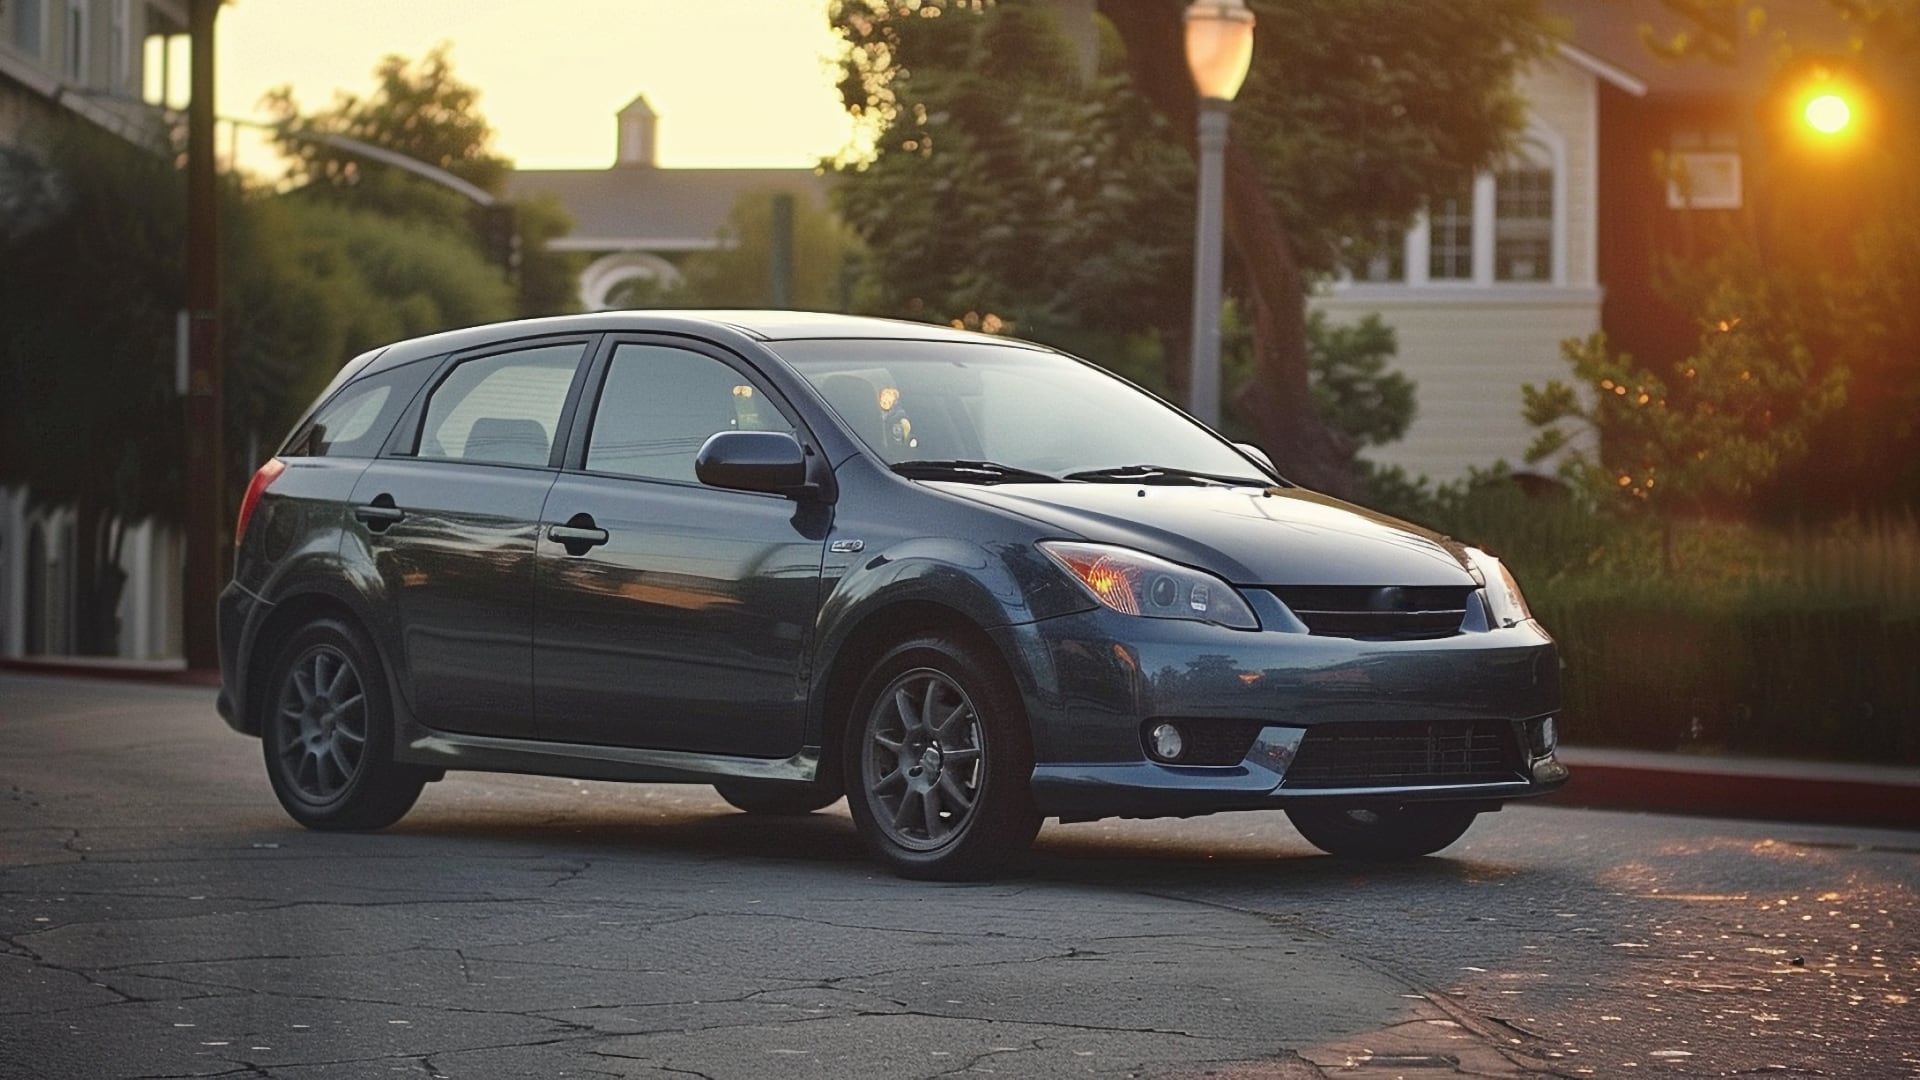 A Toyota Matrix parked on the street.